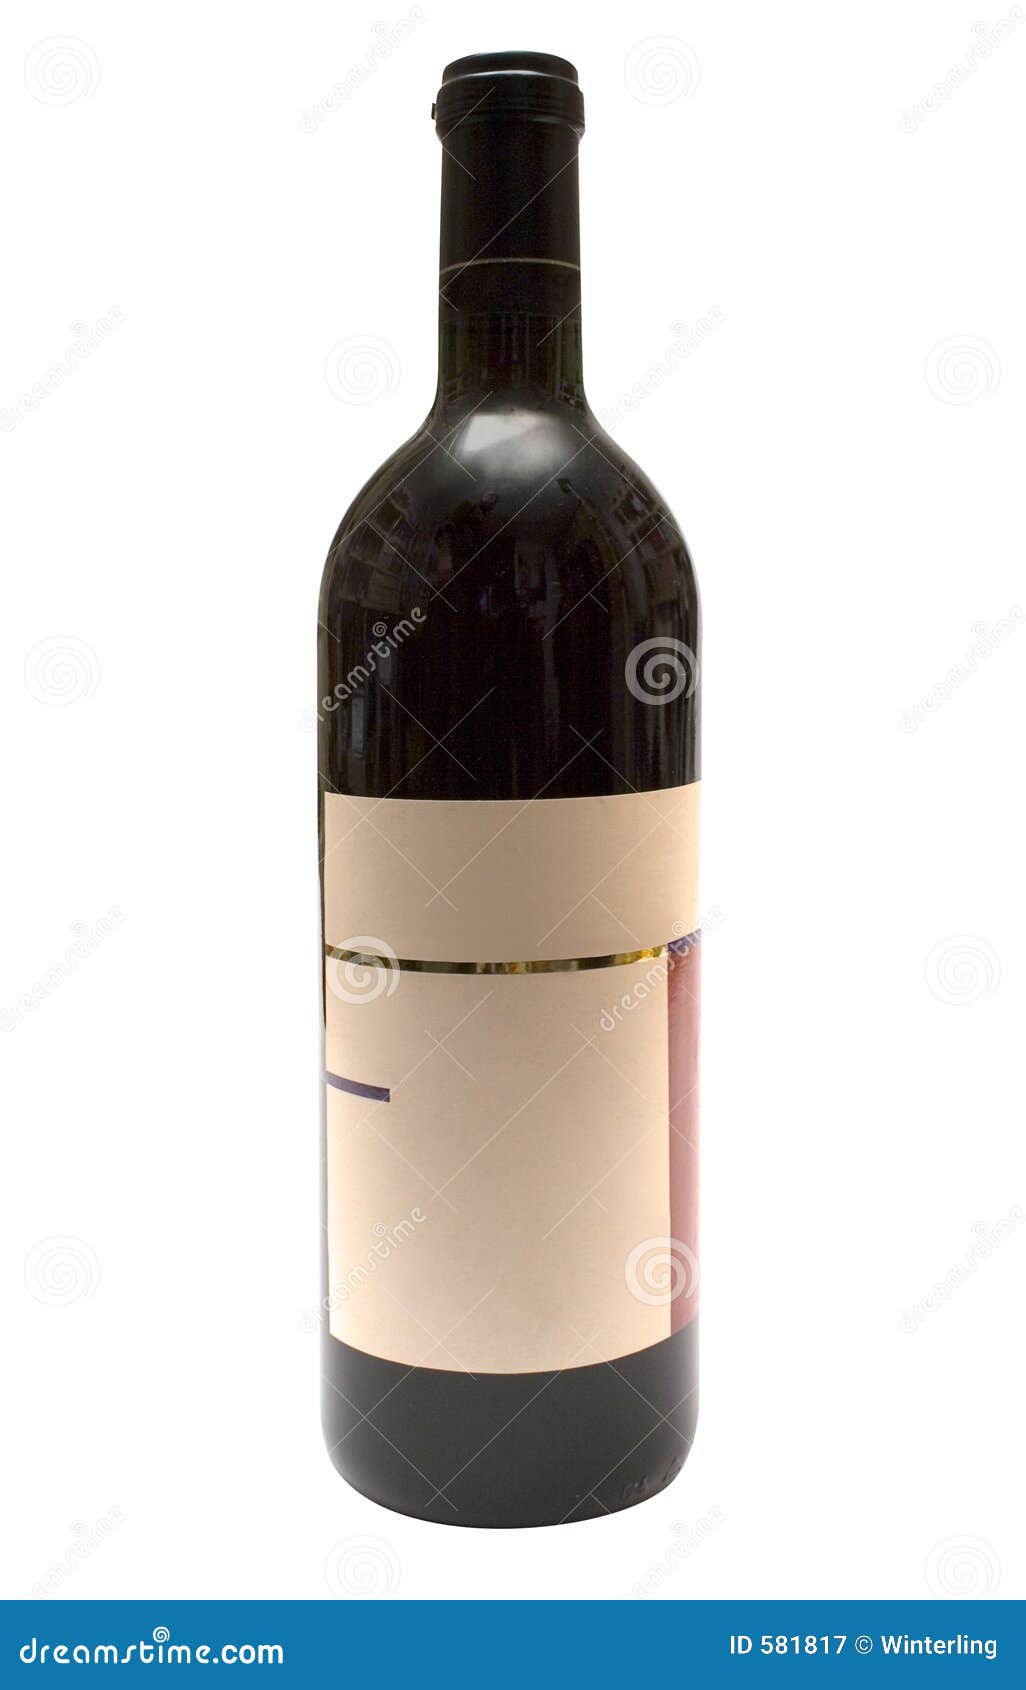 Bottle of red wine against white. Blank label for adding text. File ...